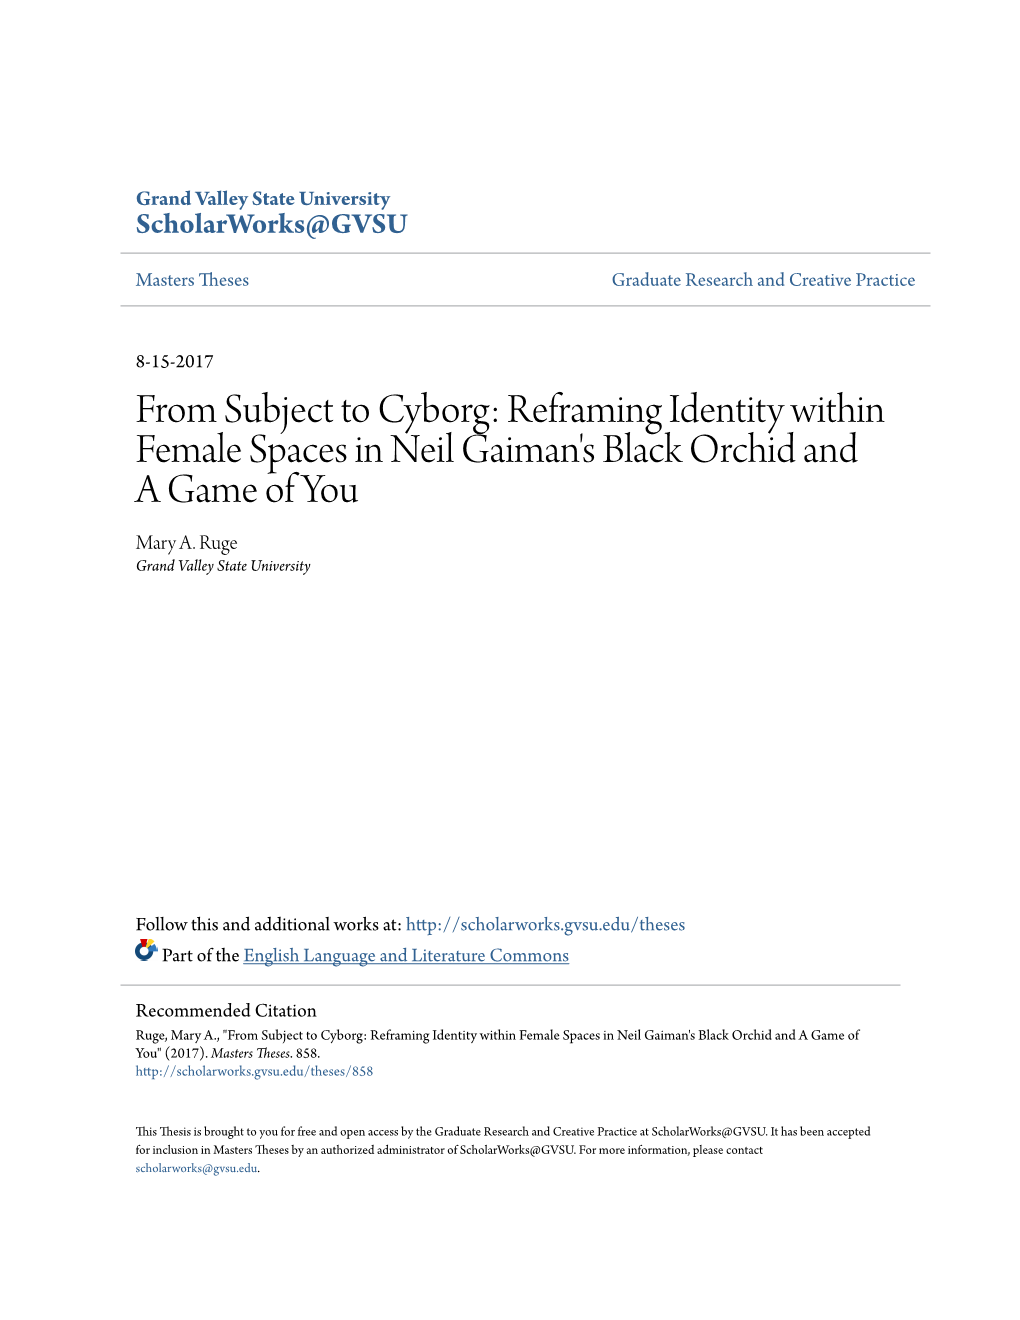 From Subject to Cyborg: Reframing Identity Within Female Spaces in Neil Gaiman's Black Orchid and a Game of You Mary A